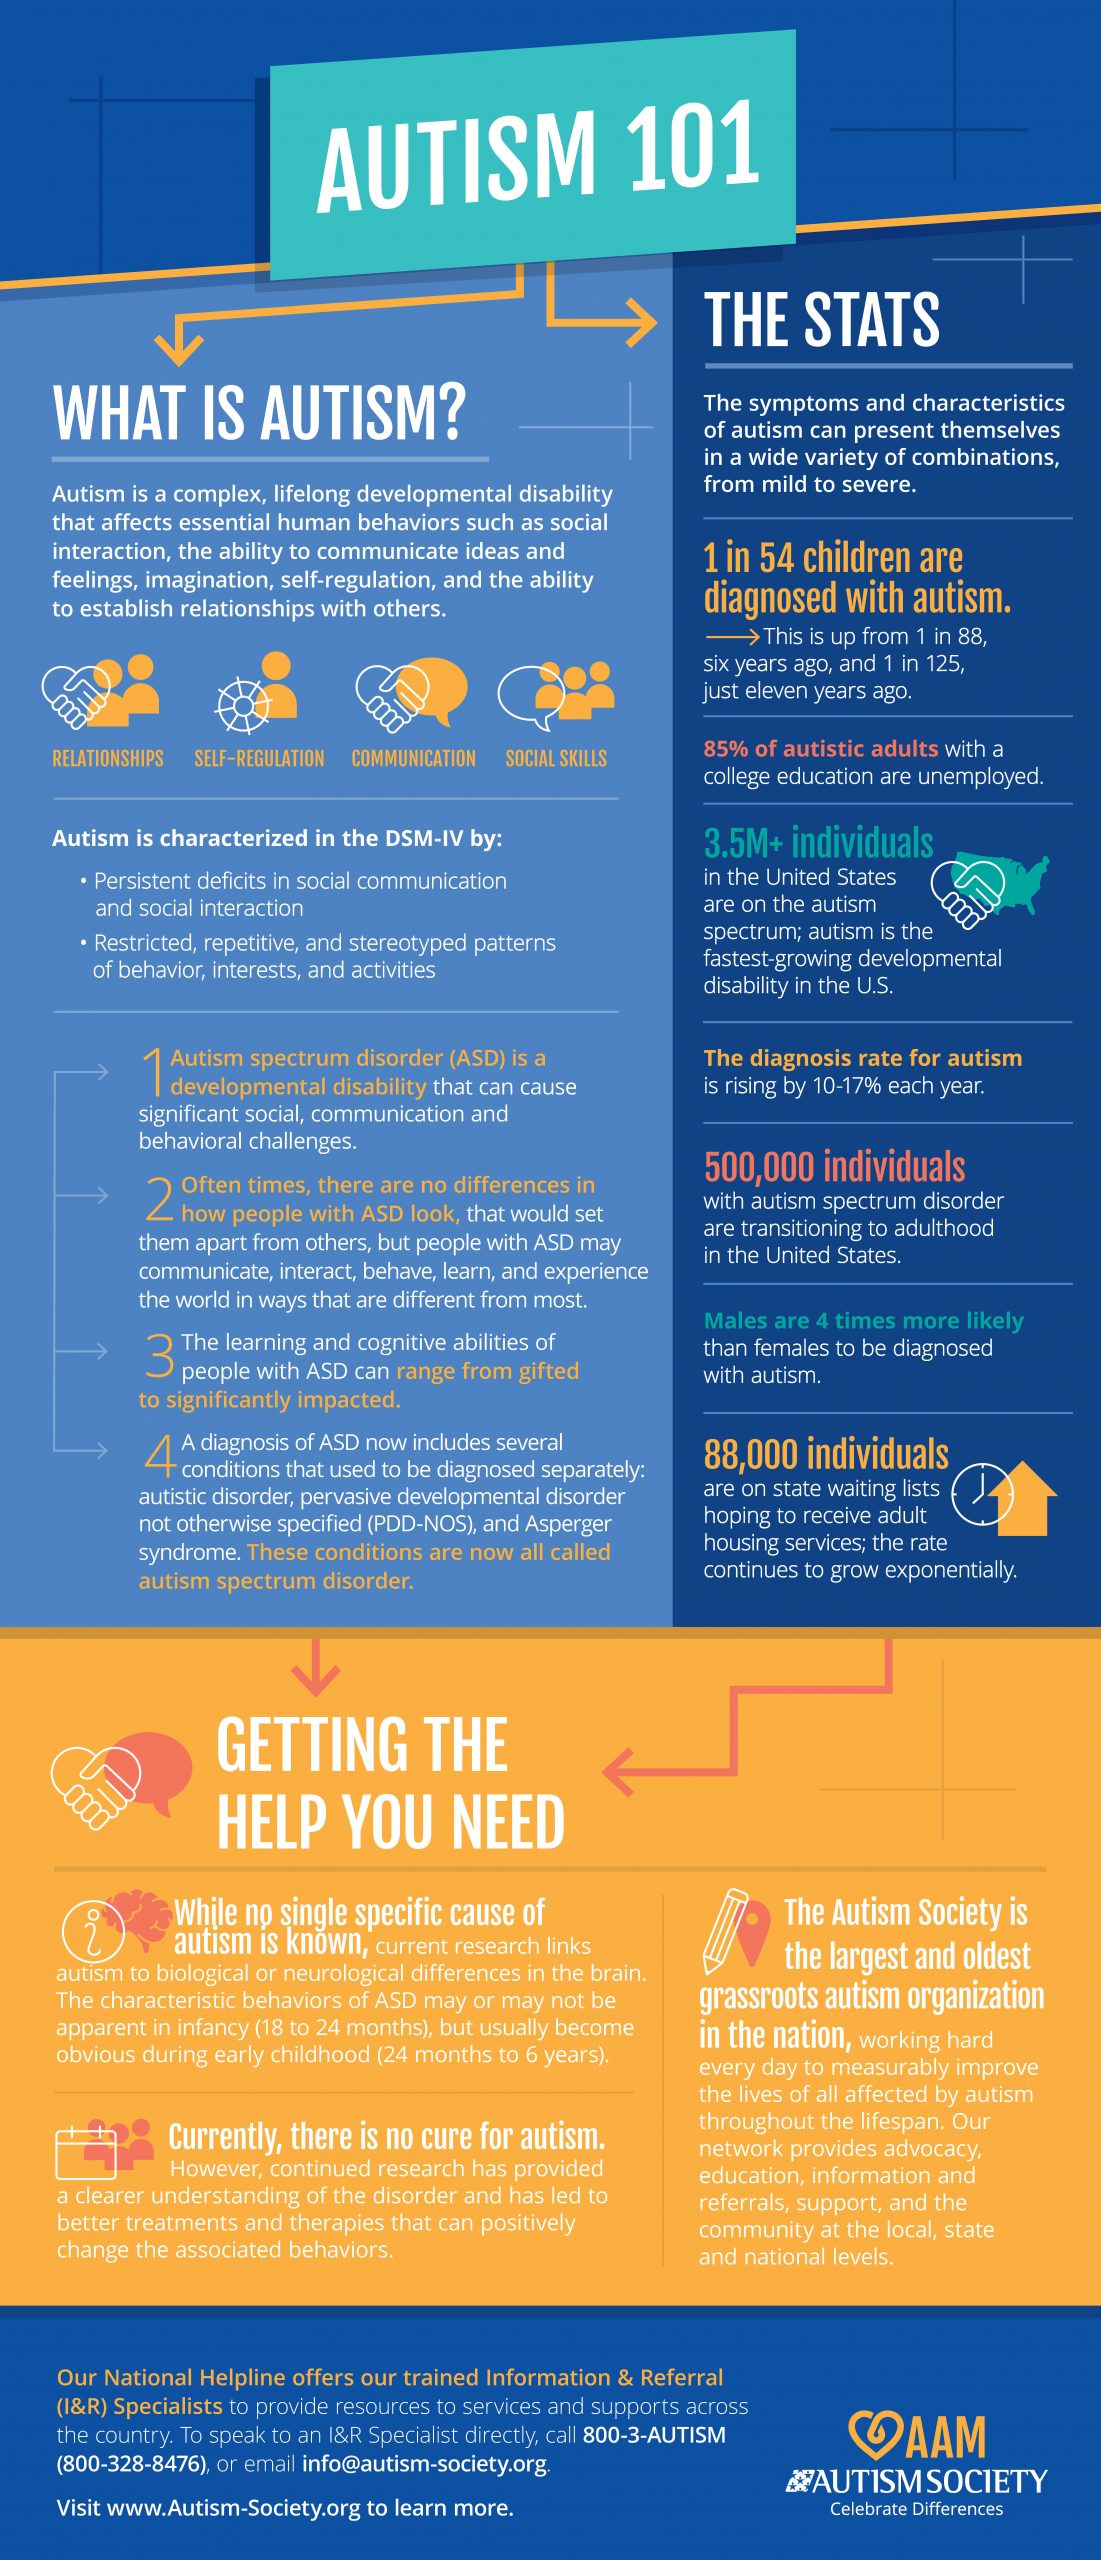 Autism 101 infographic created by the Autism Society click for the full PDF